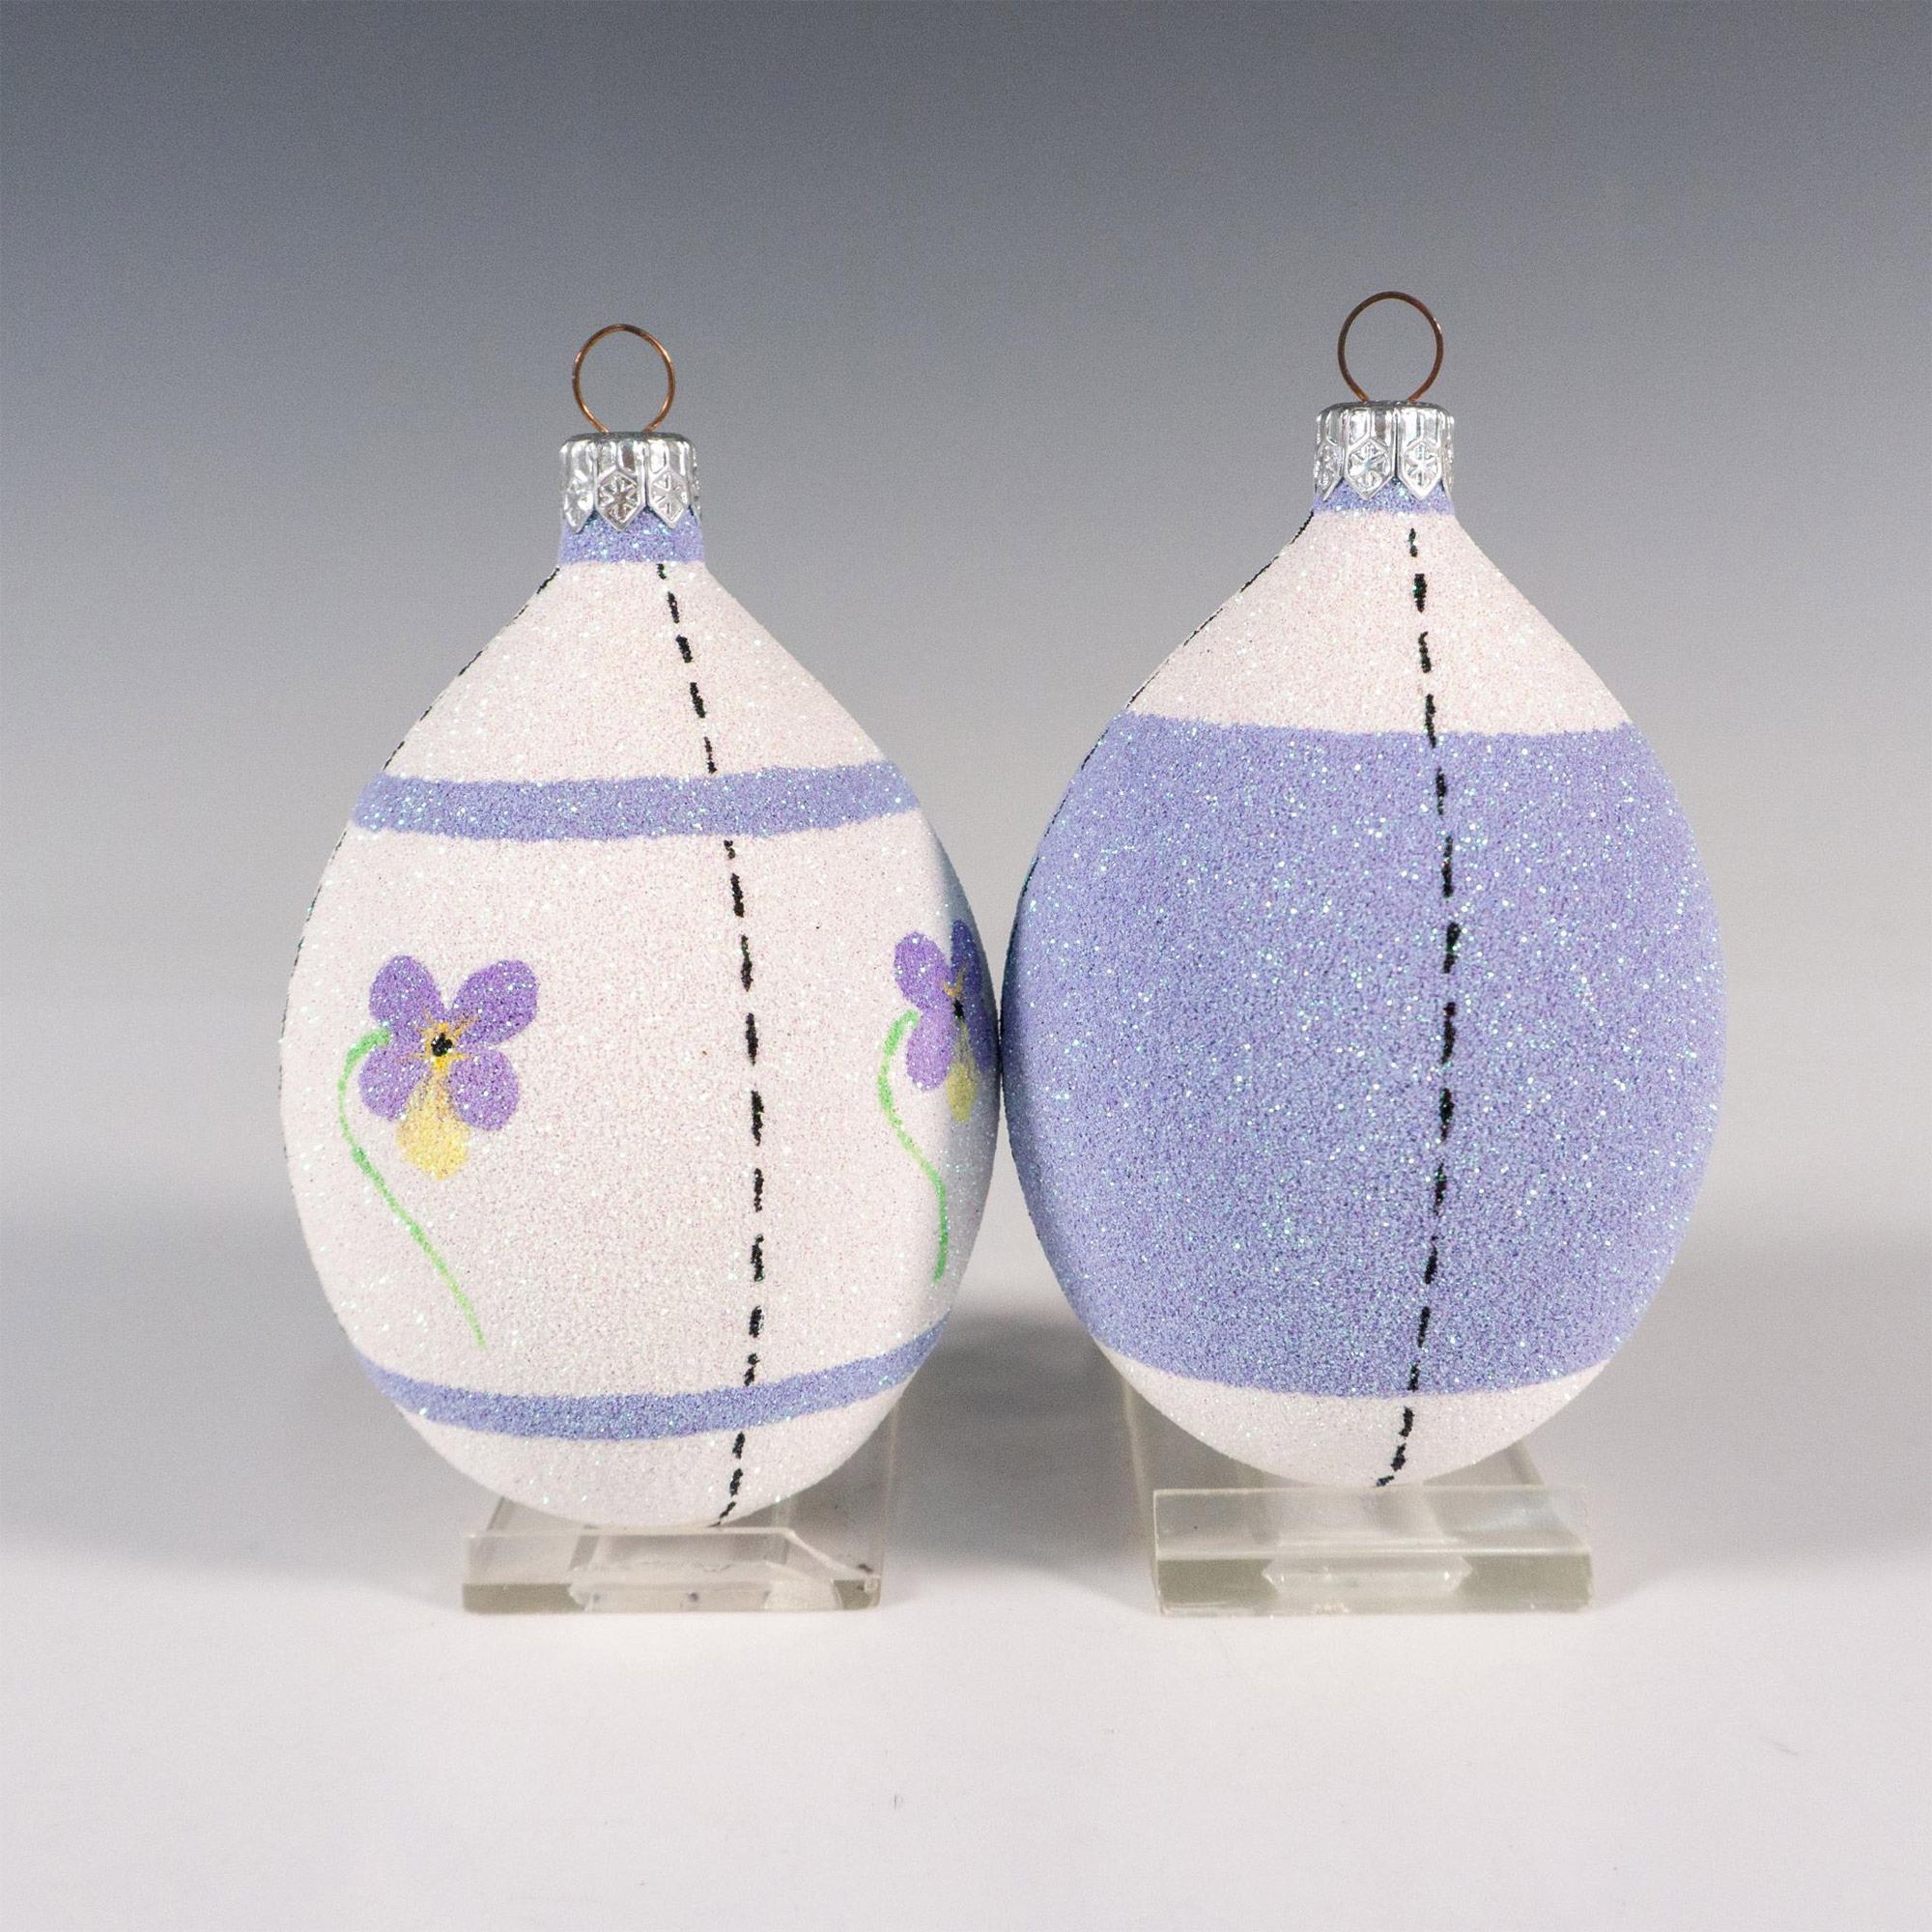 2pc Patricia Breen Pansy Ornaments - Image 2 of 2